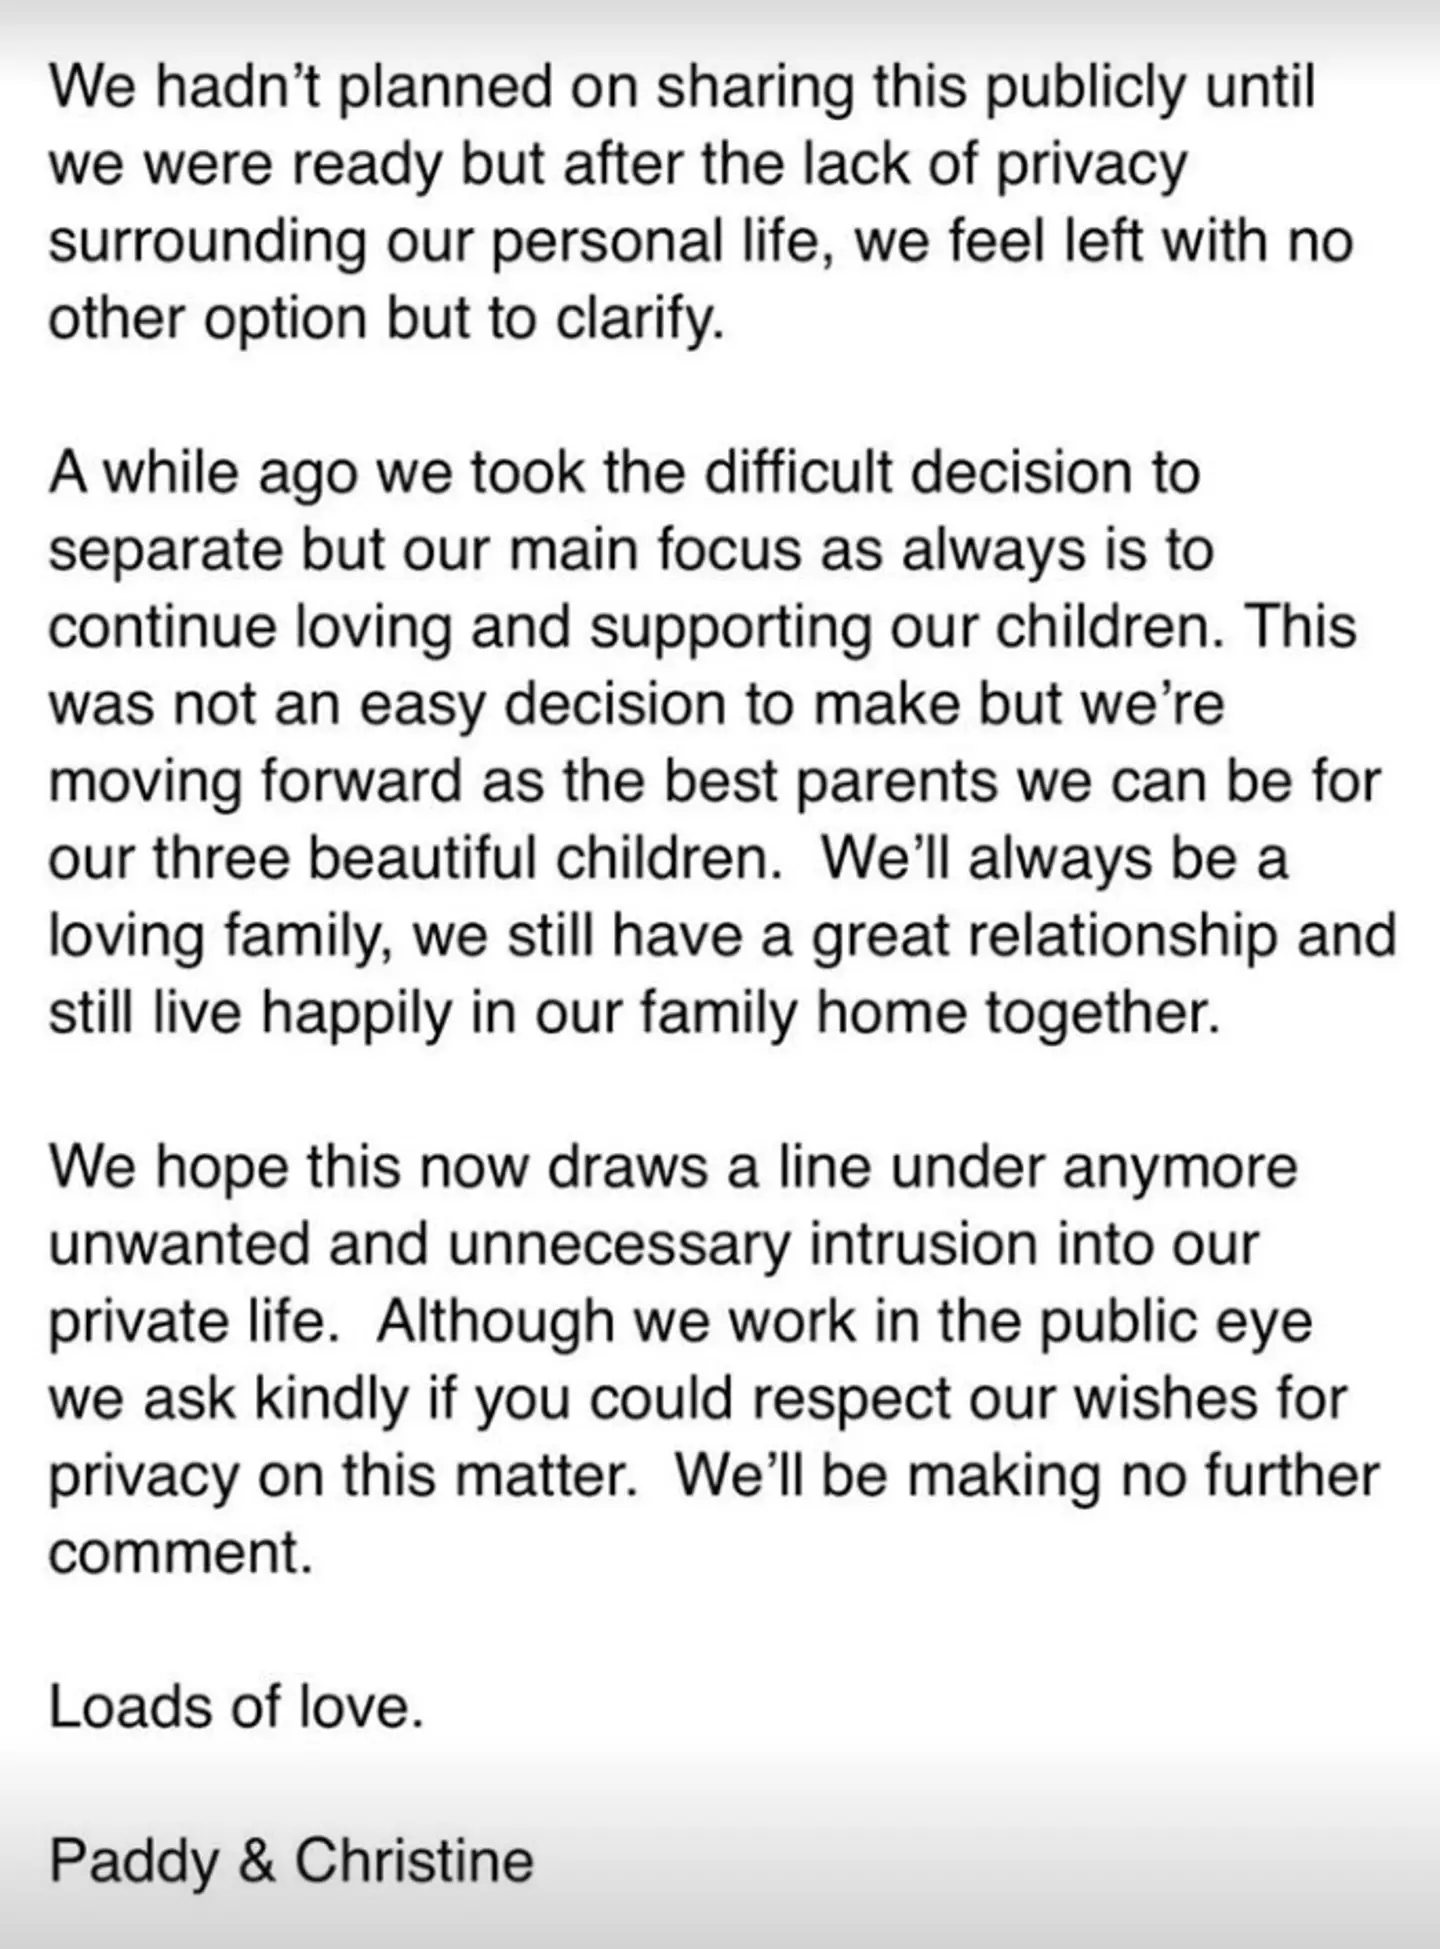 Christine took to social media to announce that she and her husband Paddy have officially separated.